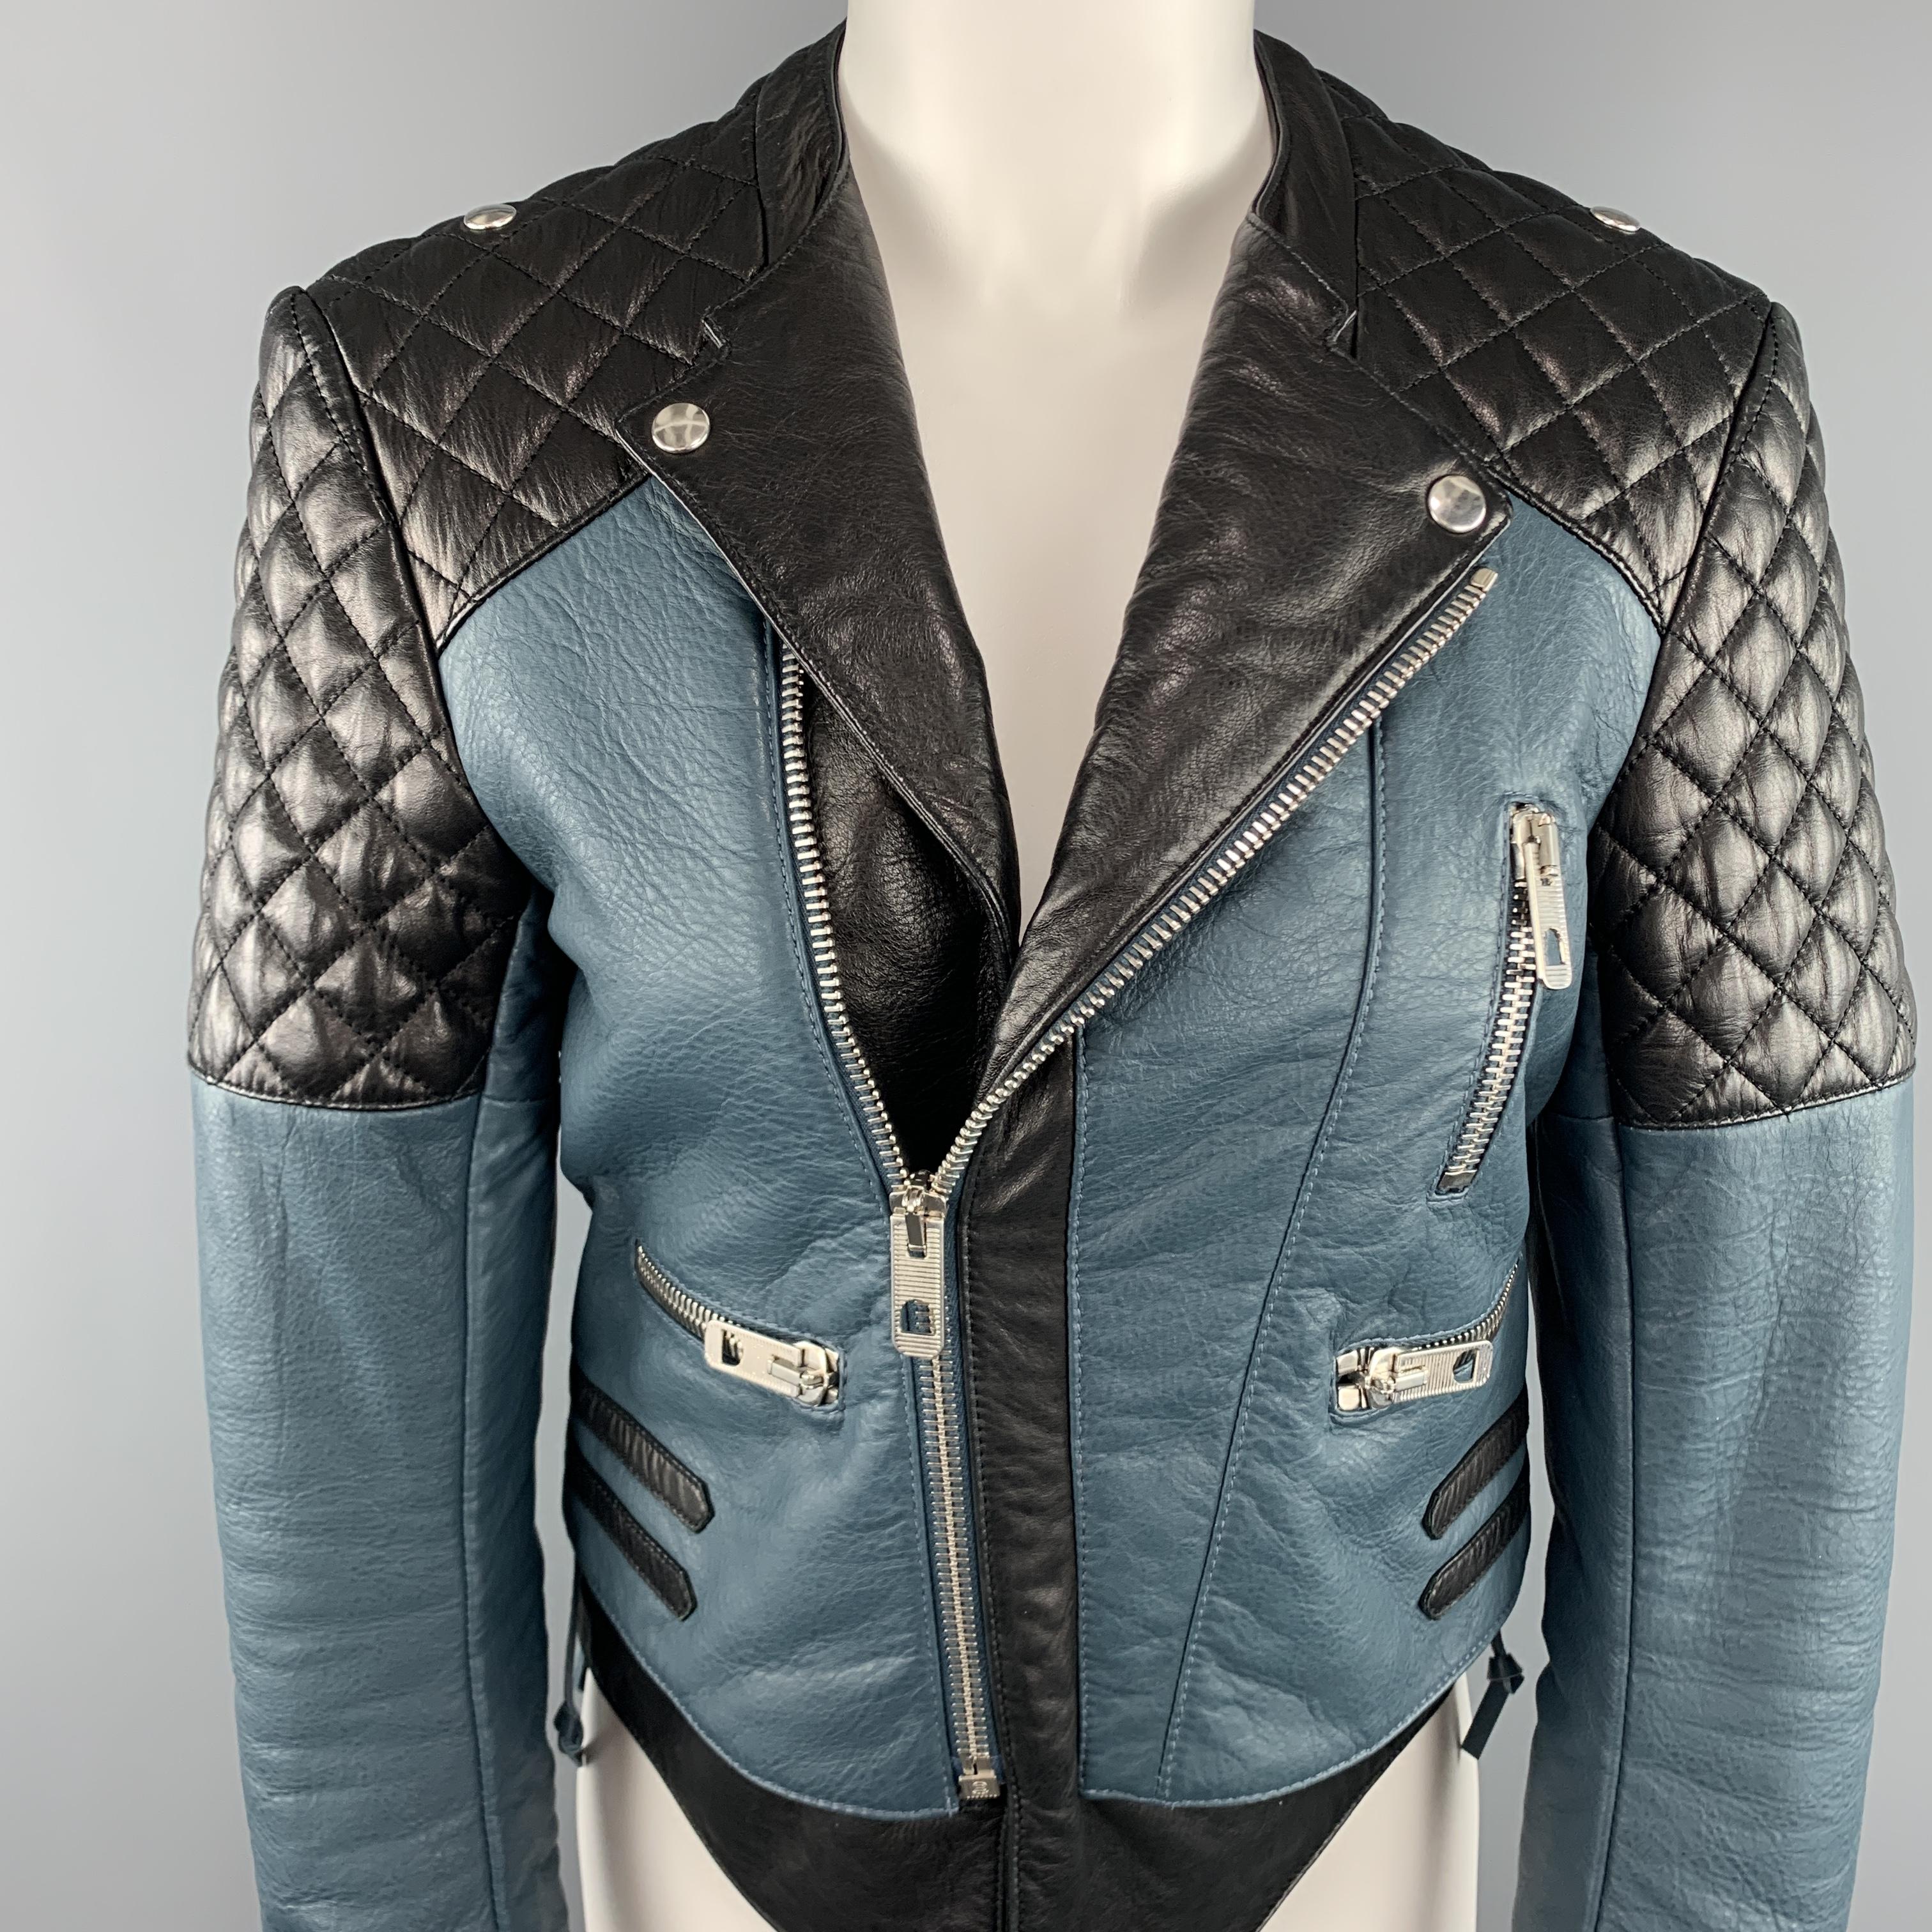 BALENCIAGA.LEATHER biker style moto jacket by NICOLAS GHESQUIERE comes in teal blue and black color block panel leather with a round neckline, pointed lapel, asymmetrical zip closure, silver tone slanted zip pockets, zip cuffs, quilted shoulders,